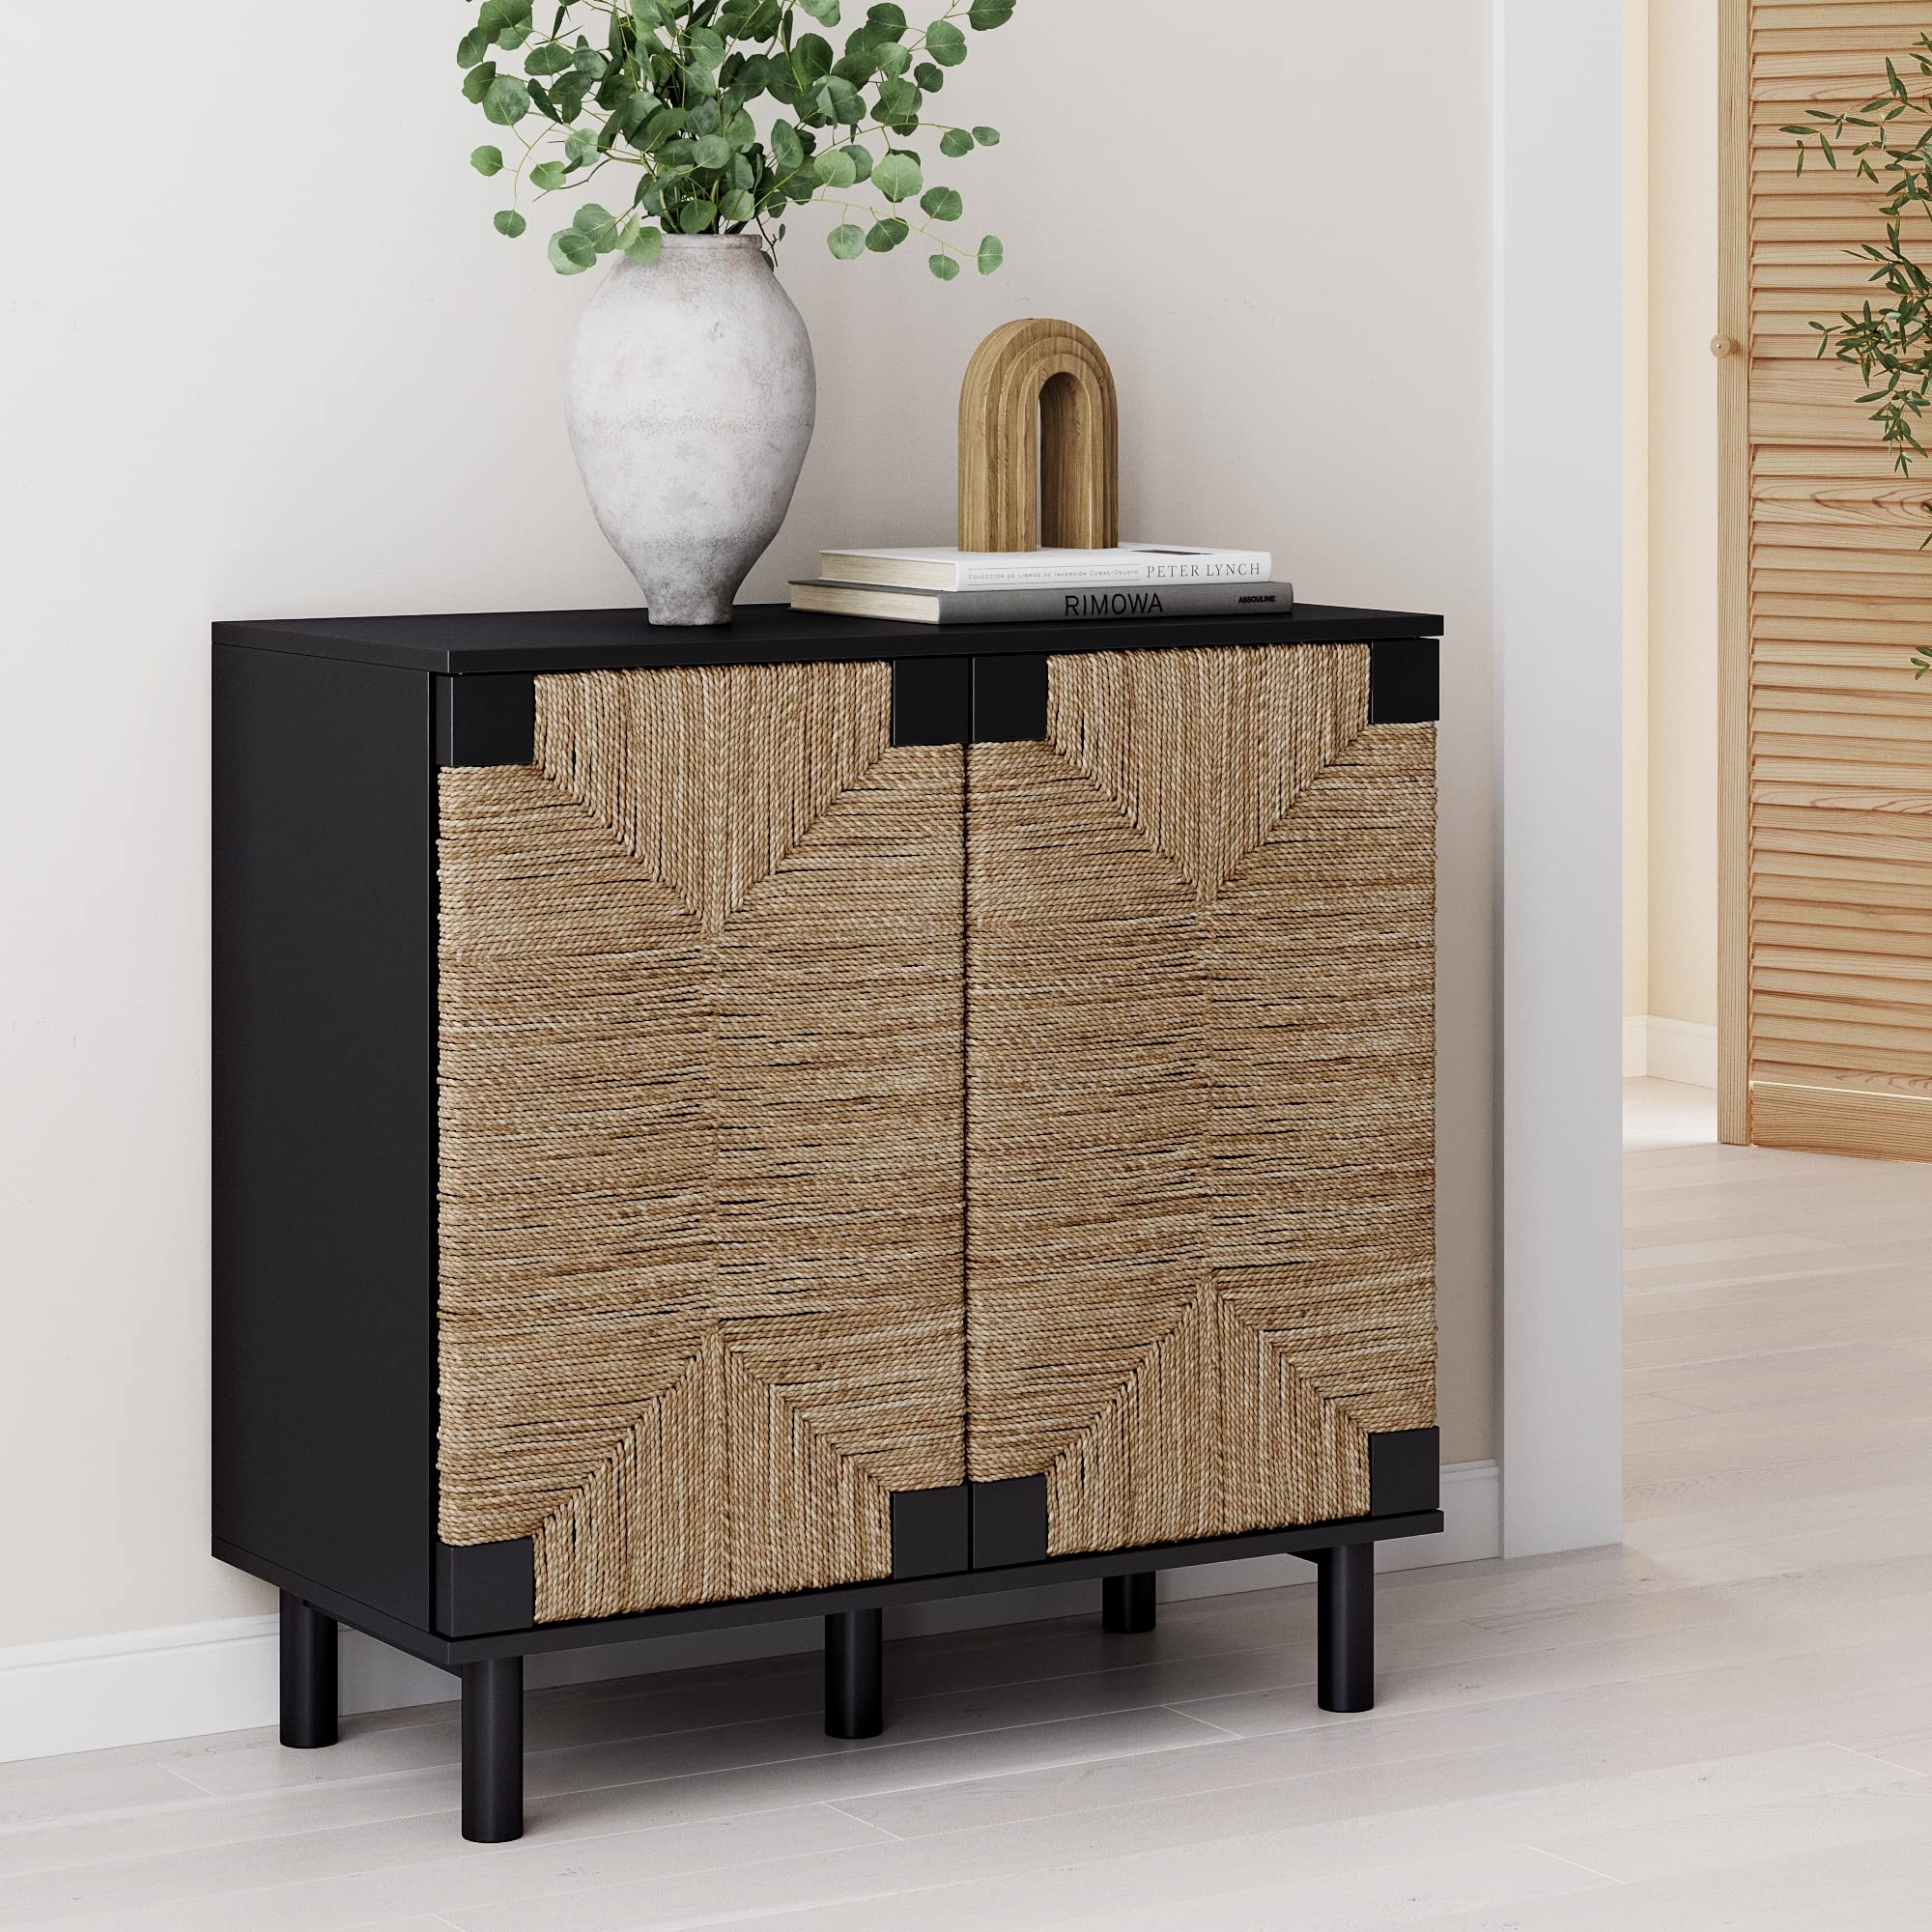 Nathan James Sideboard Buffet Modern Storage, Free Standing Accent Cabinet For Hallway, Entryway Or Living Room, 1, Black